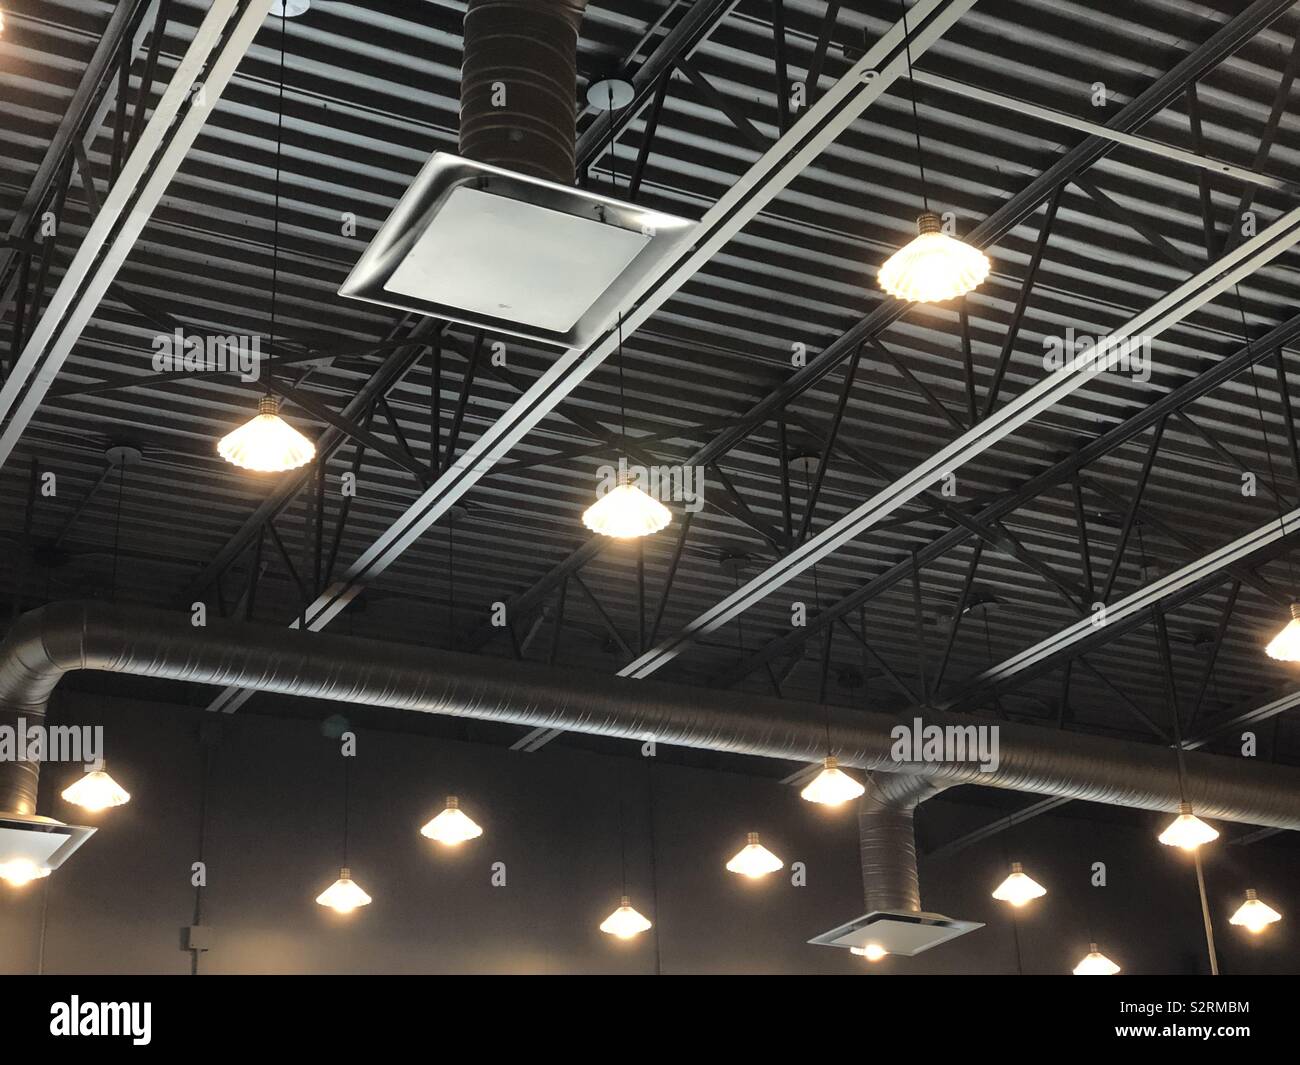 Industrial style exposed lighting installation Stock Photo